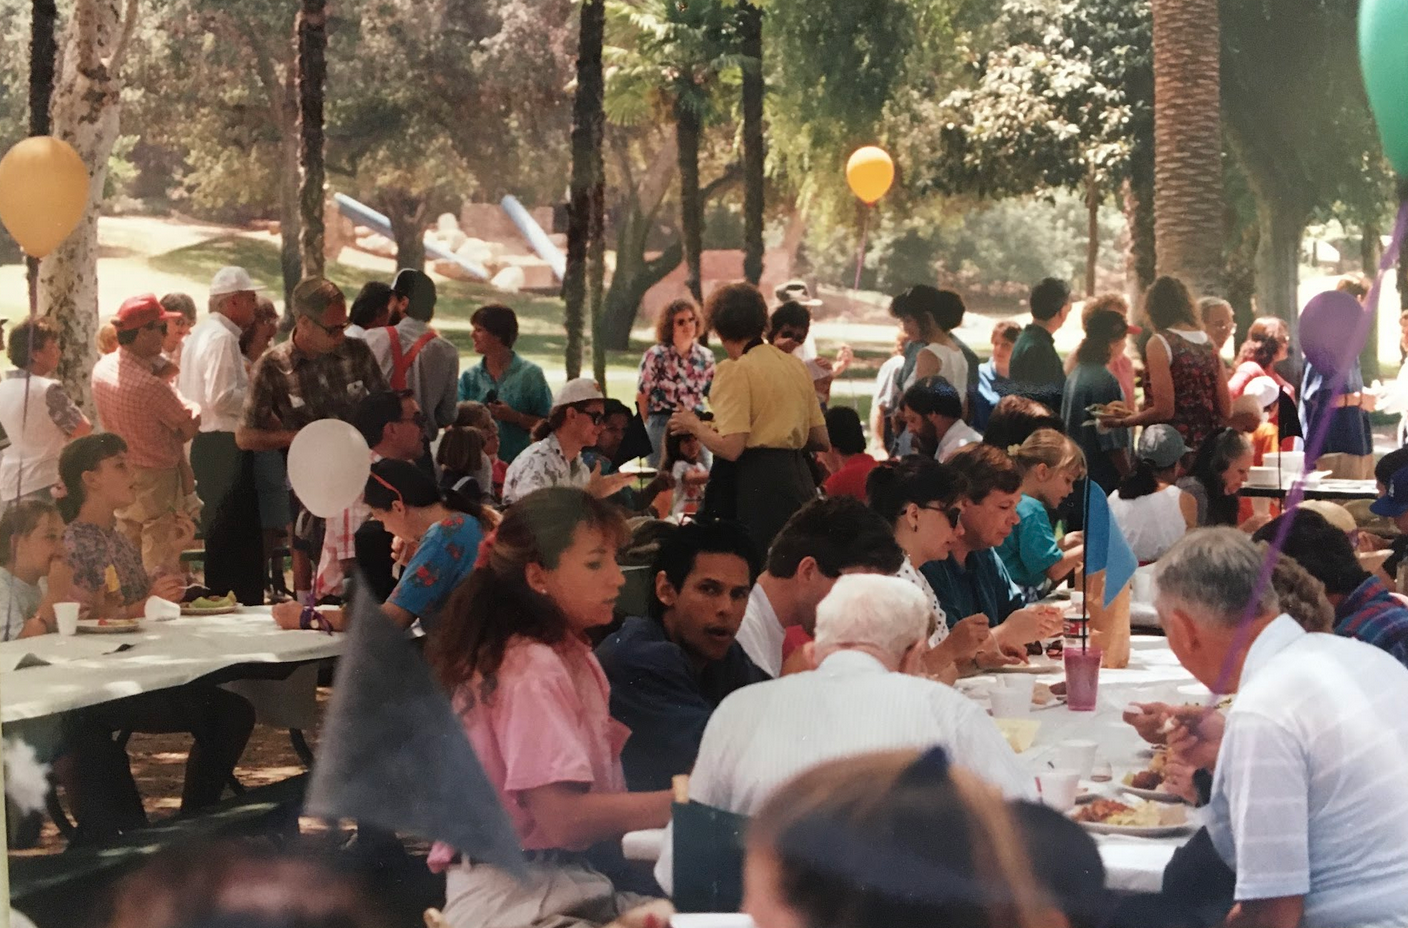 Church and picnic in the park, ~ 1992